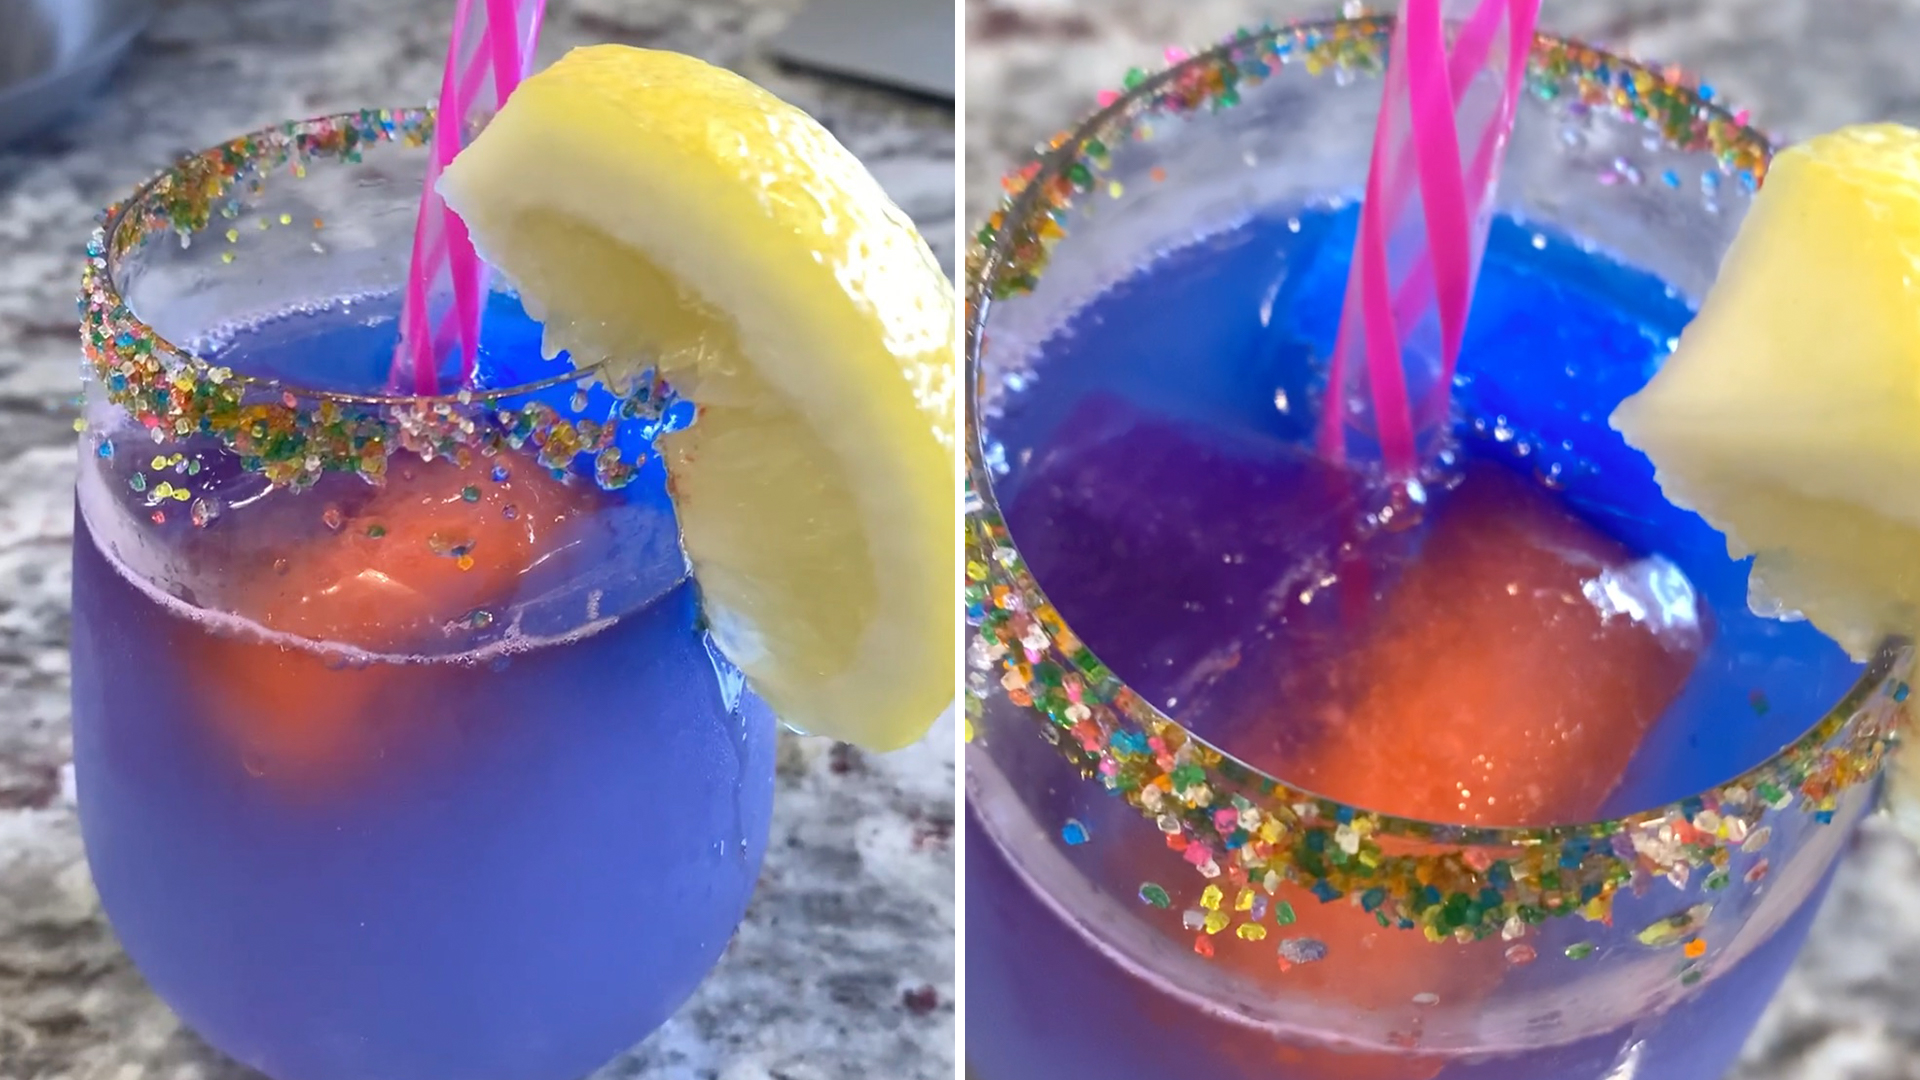 Two glasses with a sparkling rim, filled with a layered blue and purple beverage, garnished with a lemon wedge